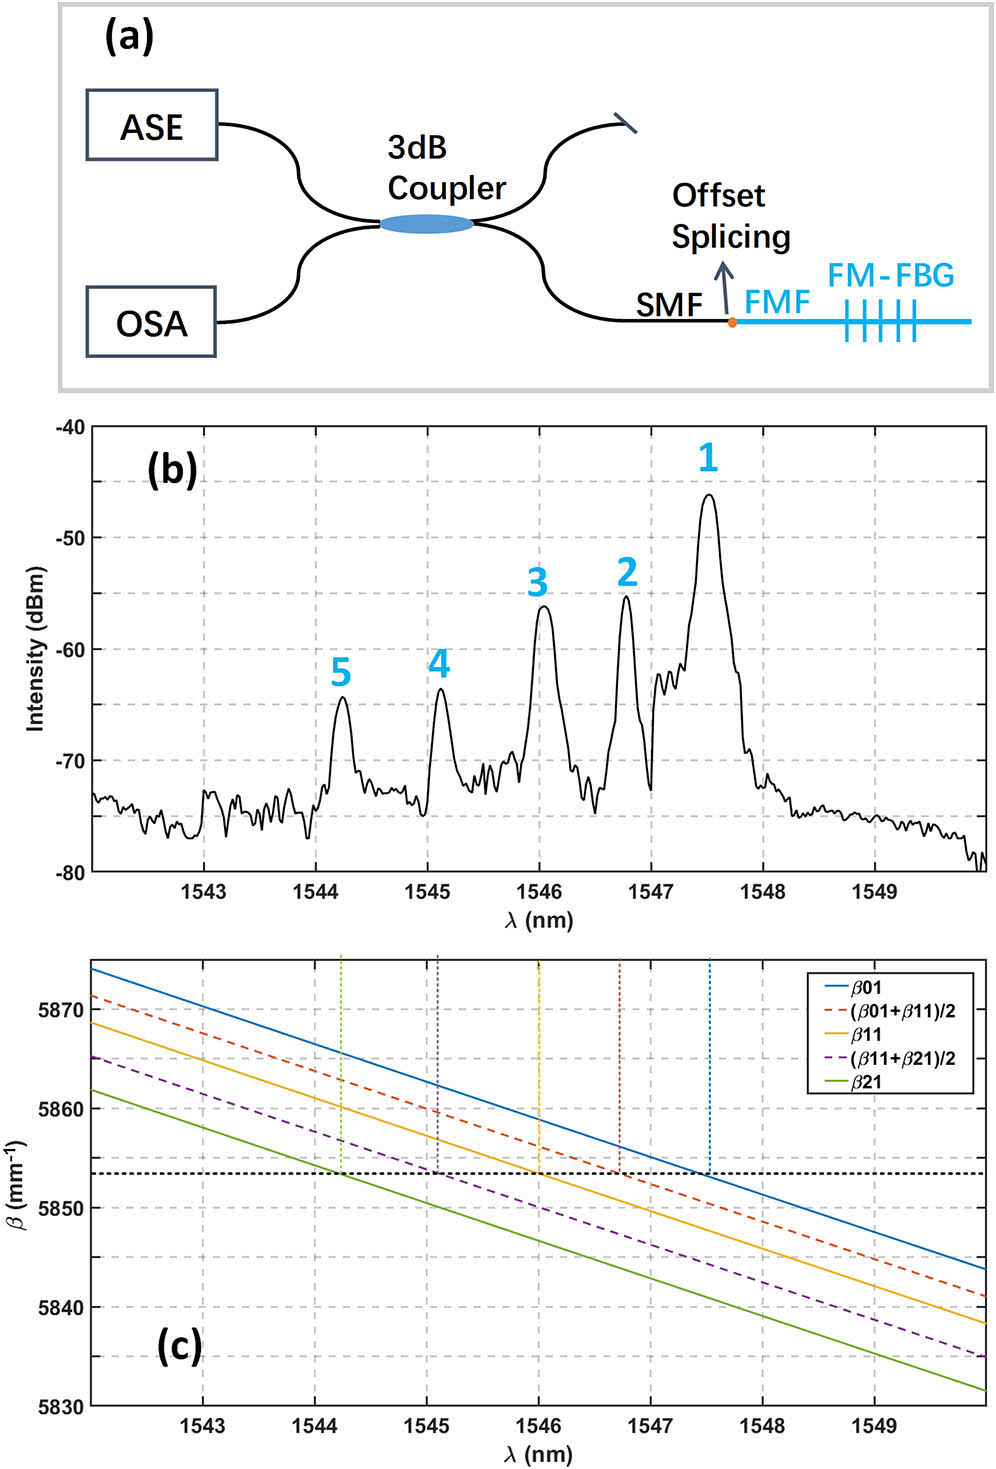 (a) Experimental setup for the measurement of reflection spectra of the FM-FBG. Black line shows the SMF and blue line shows the FMF, respectively. (b) Measured reflection spectrum of the FM-FBG with hybrid mode injection. (c) Propagation constants of LP01, LP11, and LP21 modes, the dashed lines represent the average propagation constant of the neighboring modes.